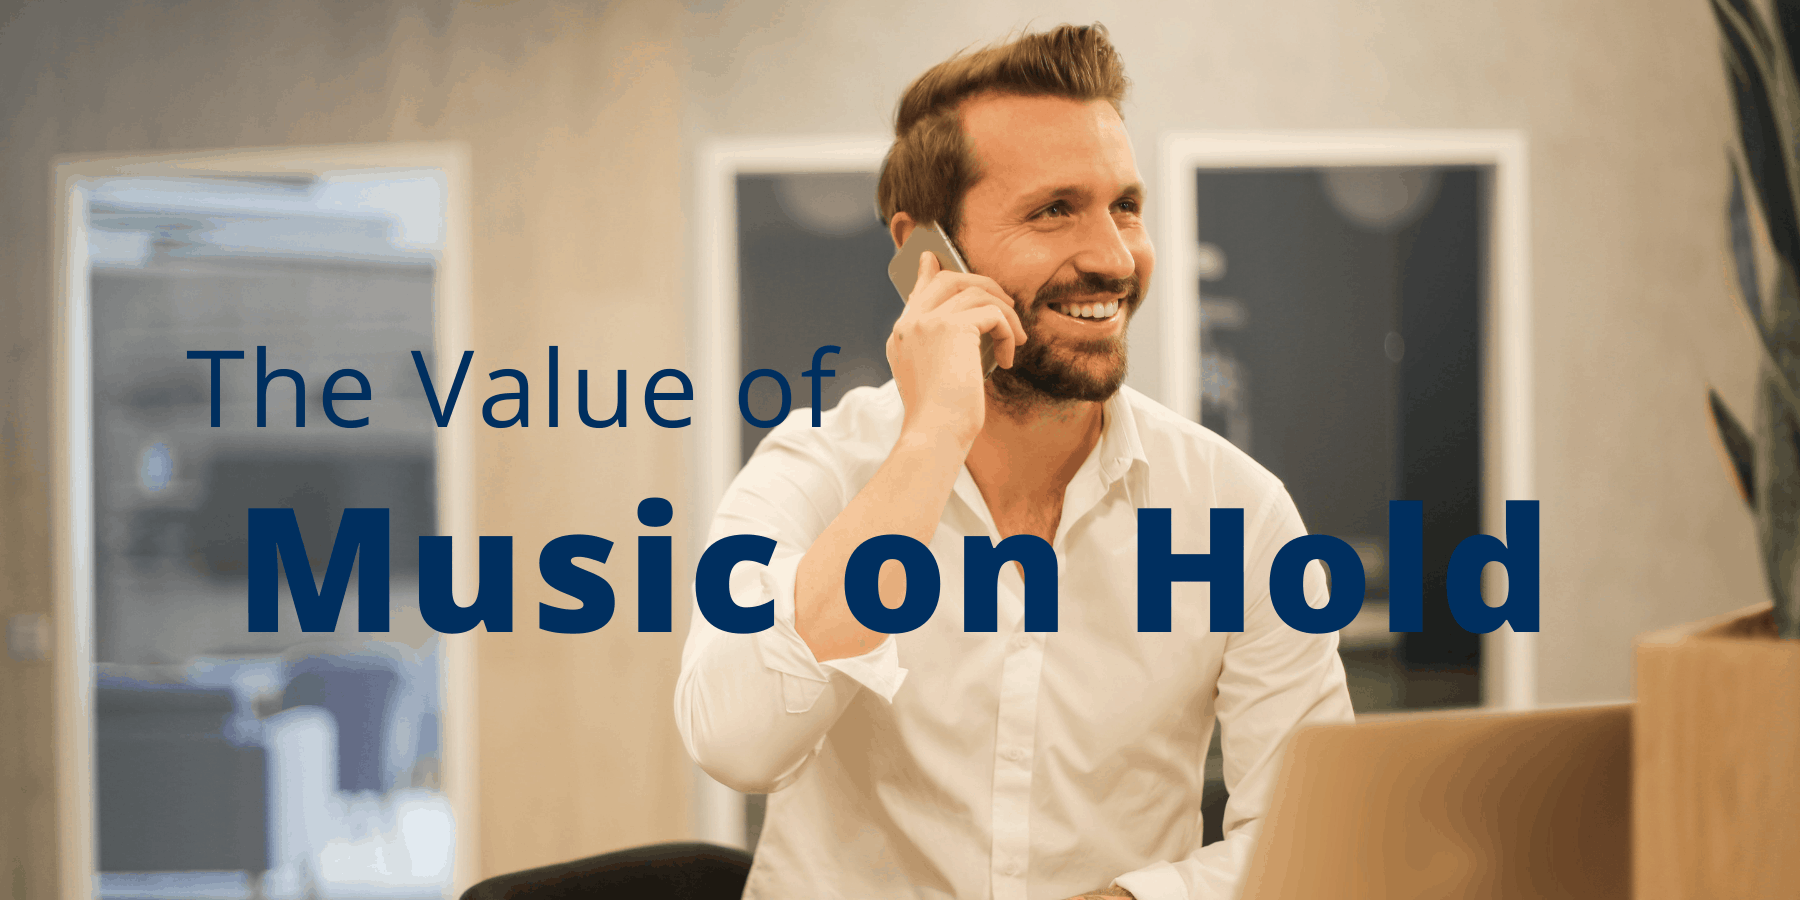 The Value of Music on Hold